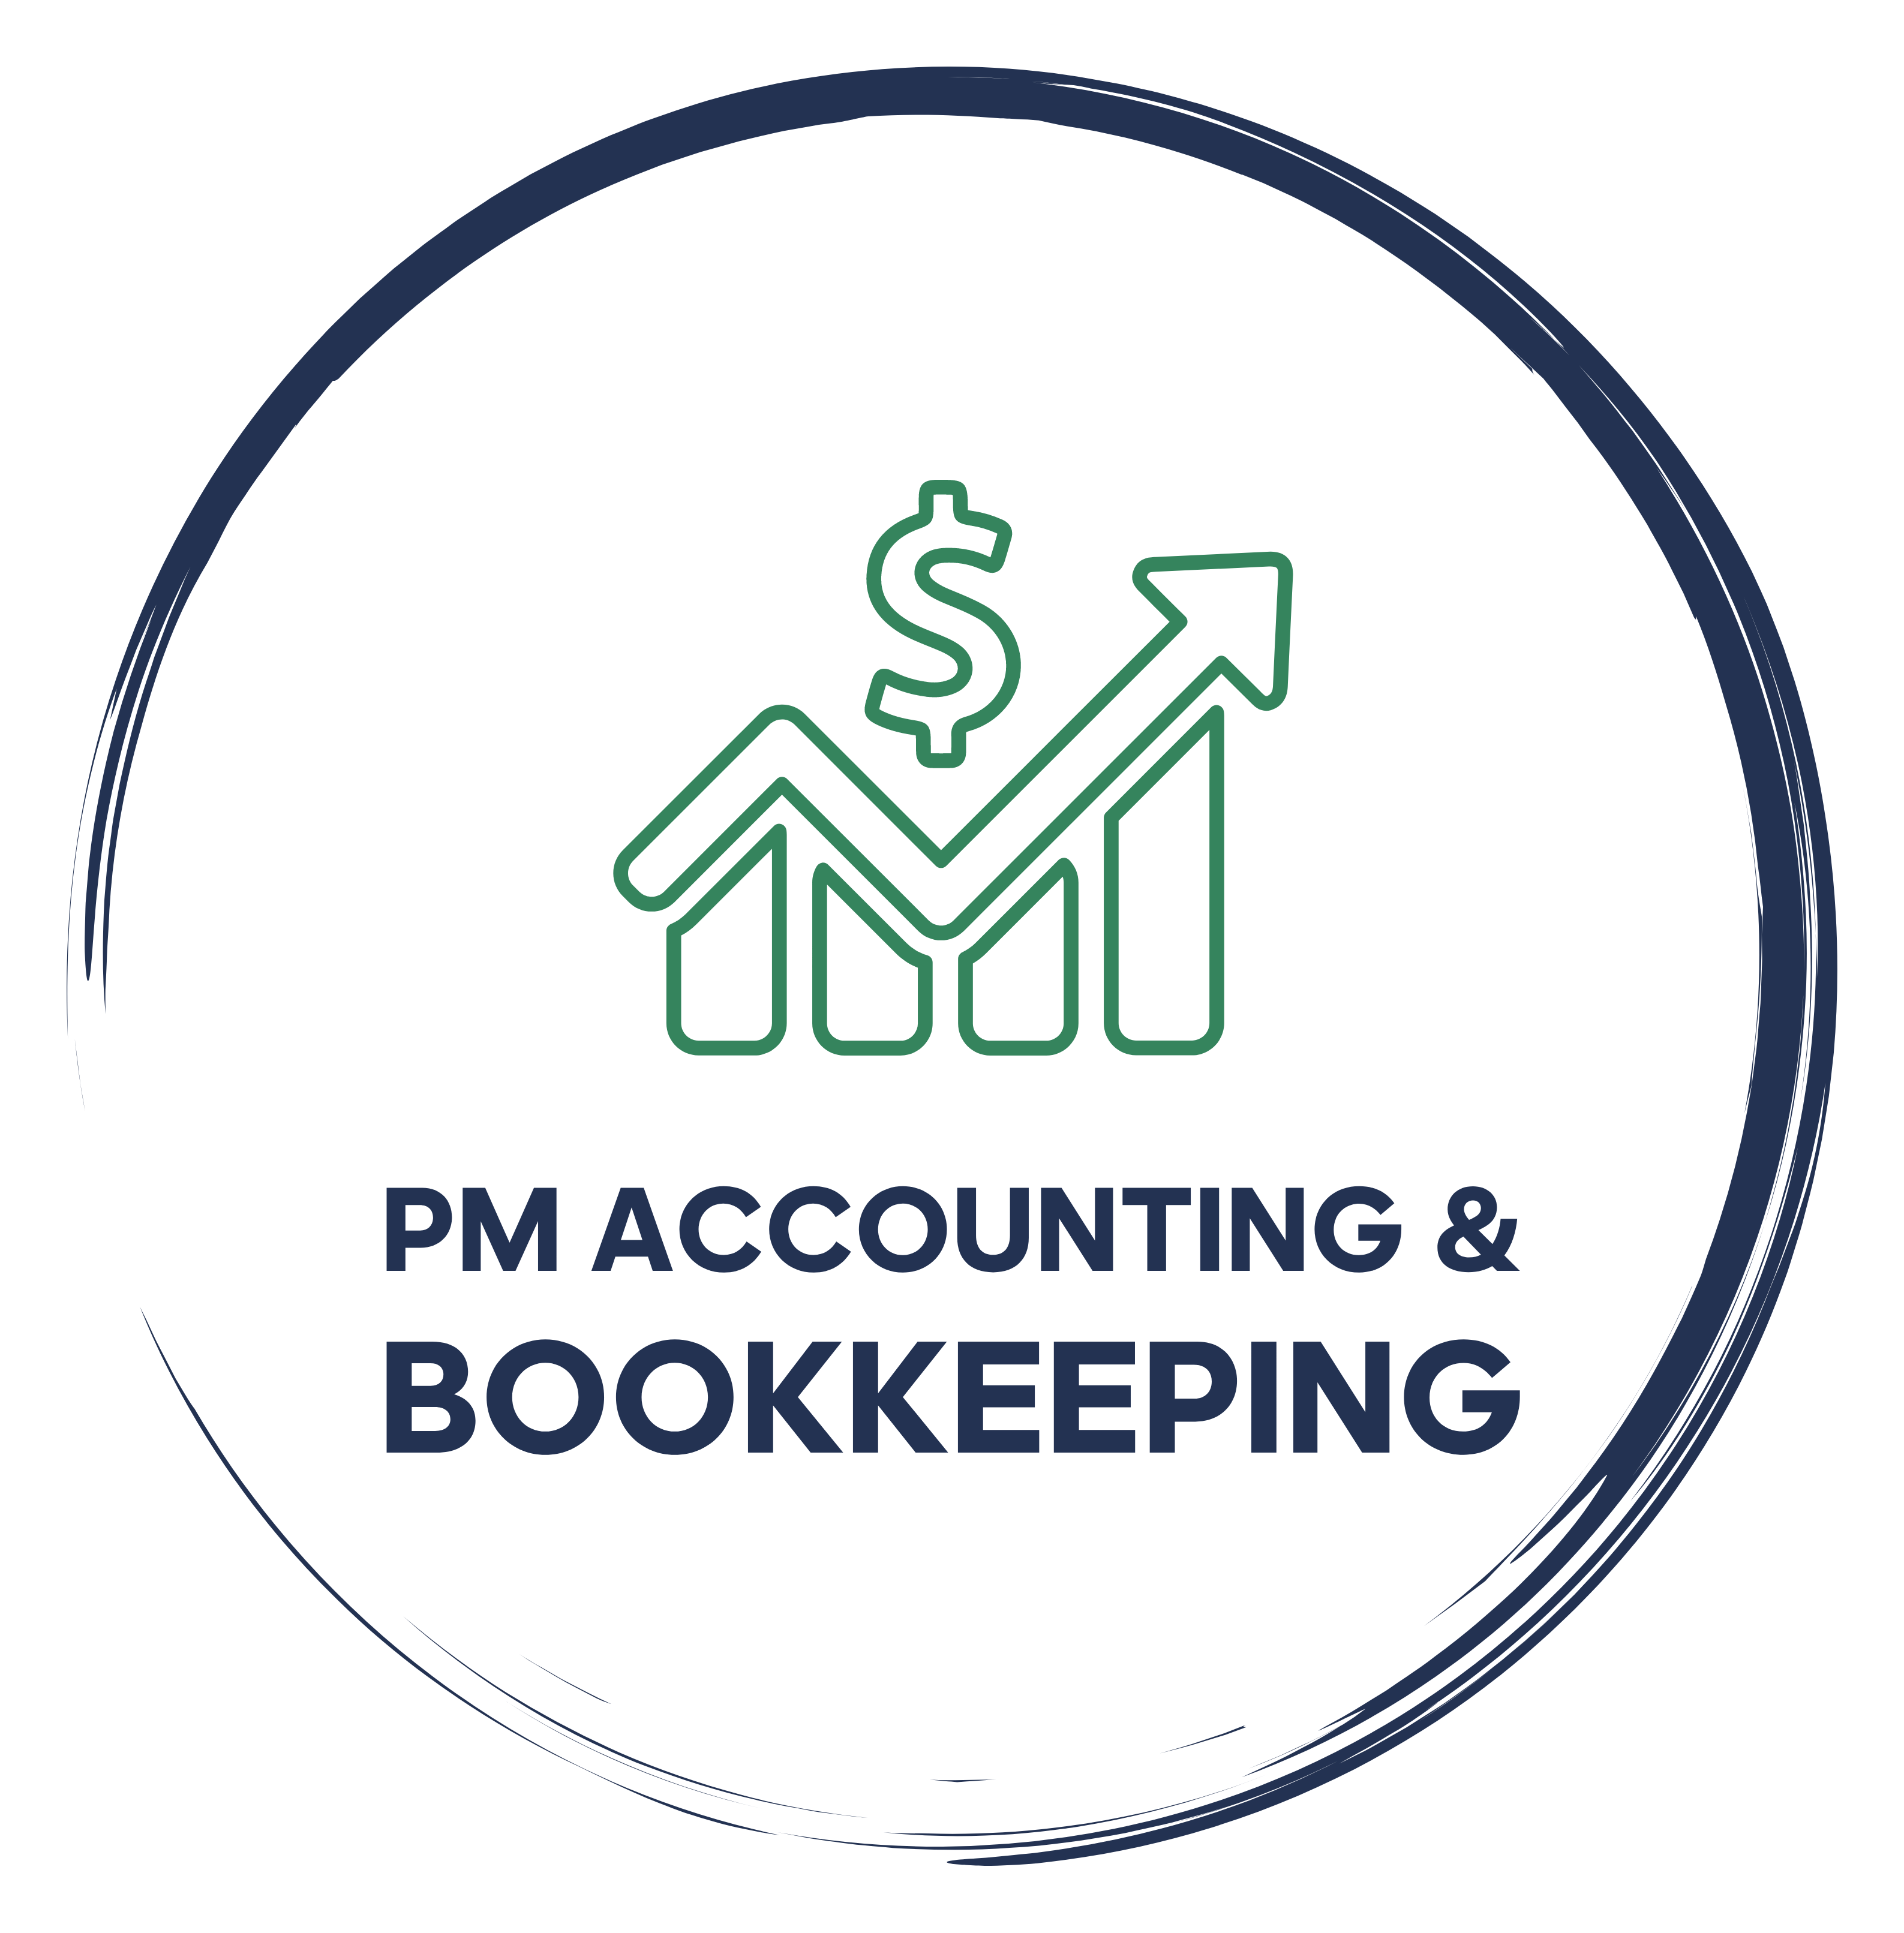 PM Accounting And Bookkeping logo